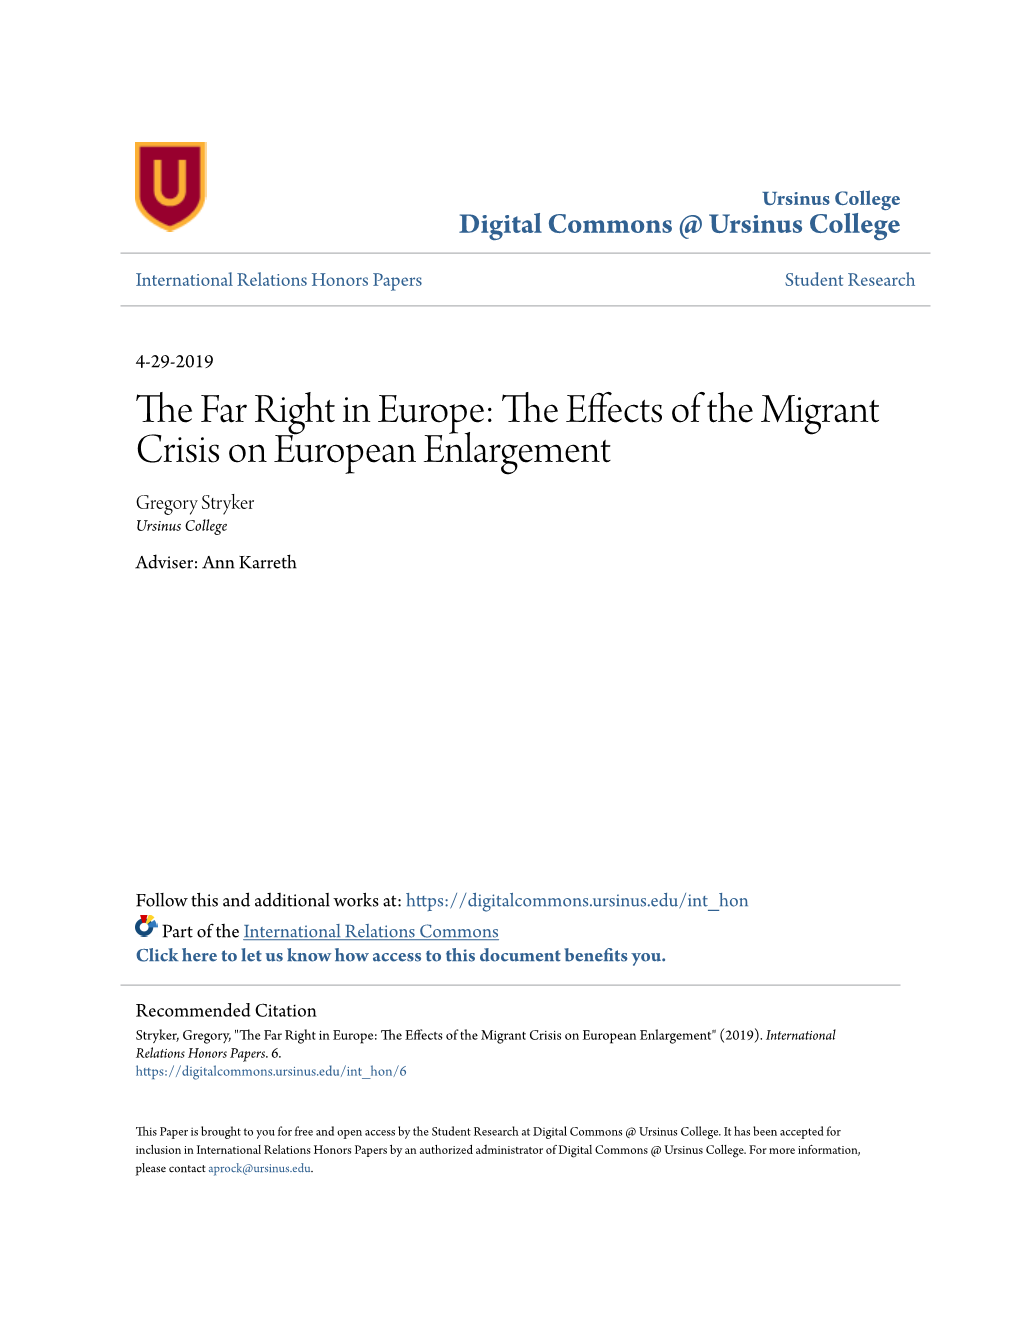 The Far Right in Europe: the Effects of the Migrant Crisis on European Enlargement